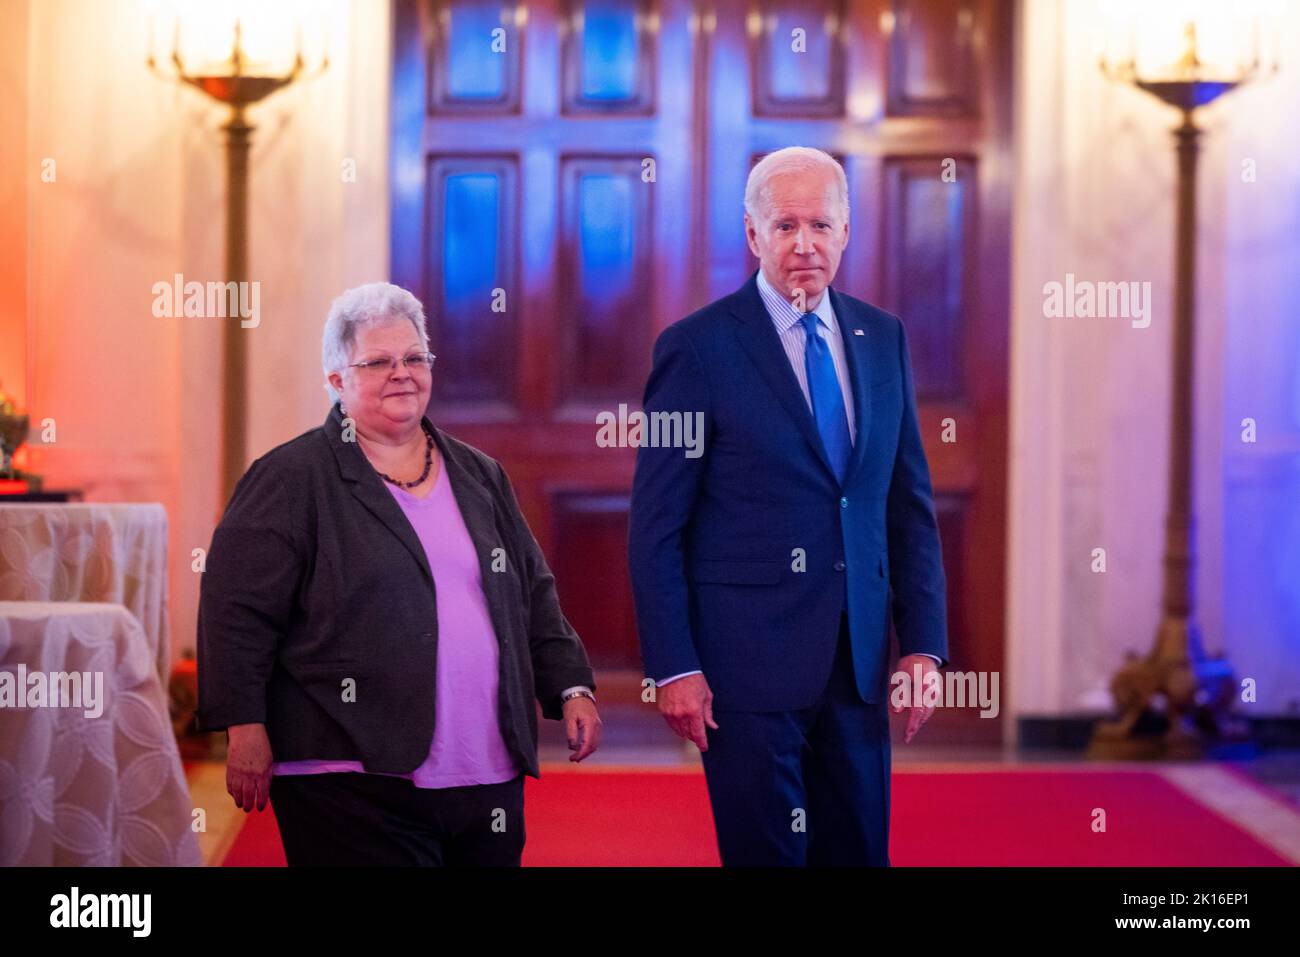 Washington DC, USA. 15th Sep, 2022. United States President Joe Biden (R) along with Susan Bro (L) prepares to speak at the United We Stand Summit in the East Room of the White House in Washington DC, USA, 15 September 2022. Bro is the mother of Heather Heyer, who was killed at the Unite the Right rally in Charlottesville, Virginia in 2017. Credit: Jim LoScalzo/Pool via CNP/dpa/Alamy Live News Stock Photo